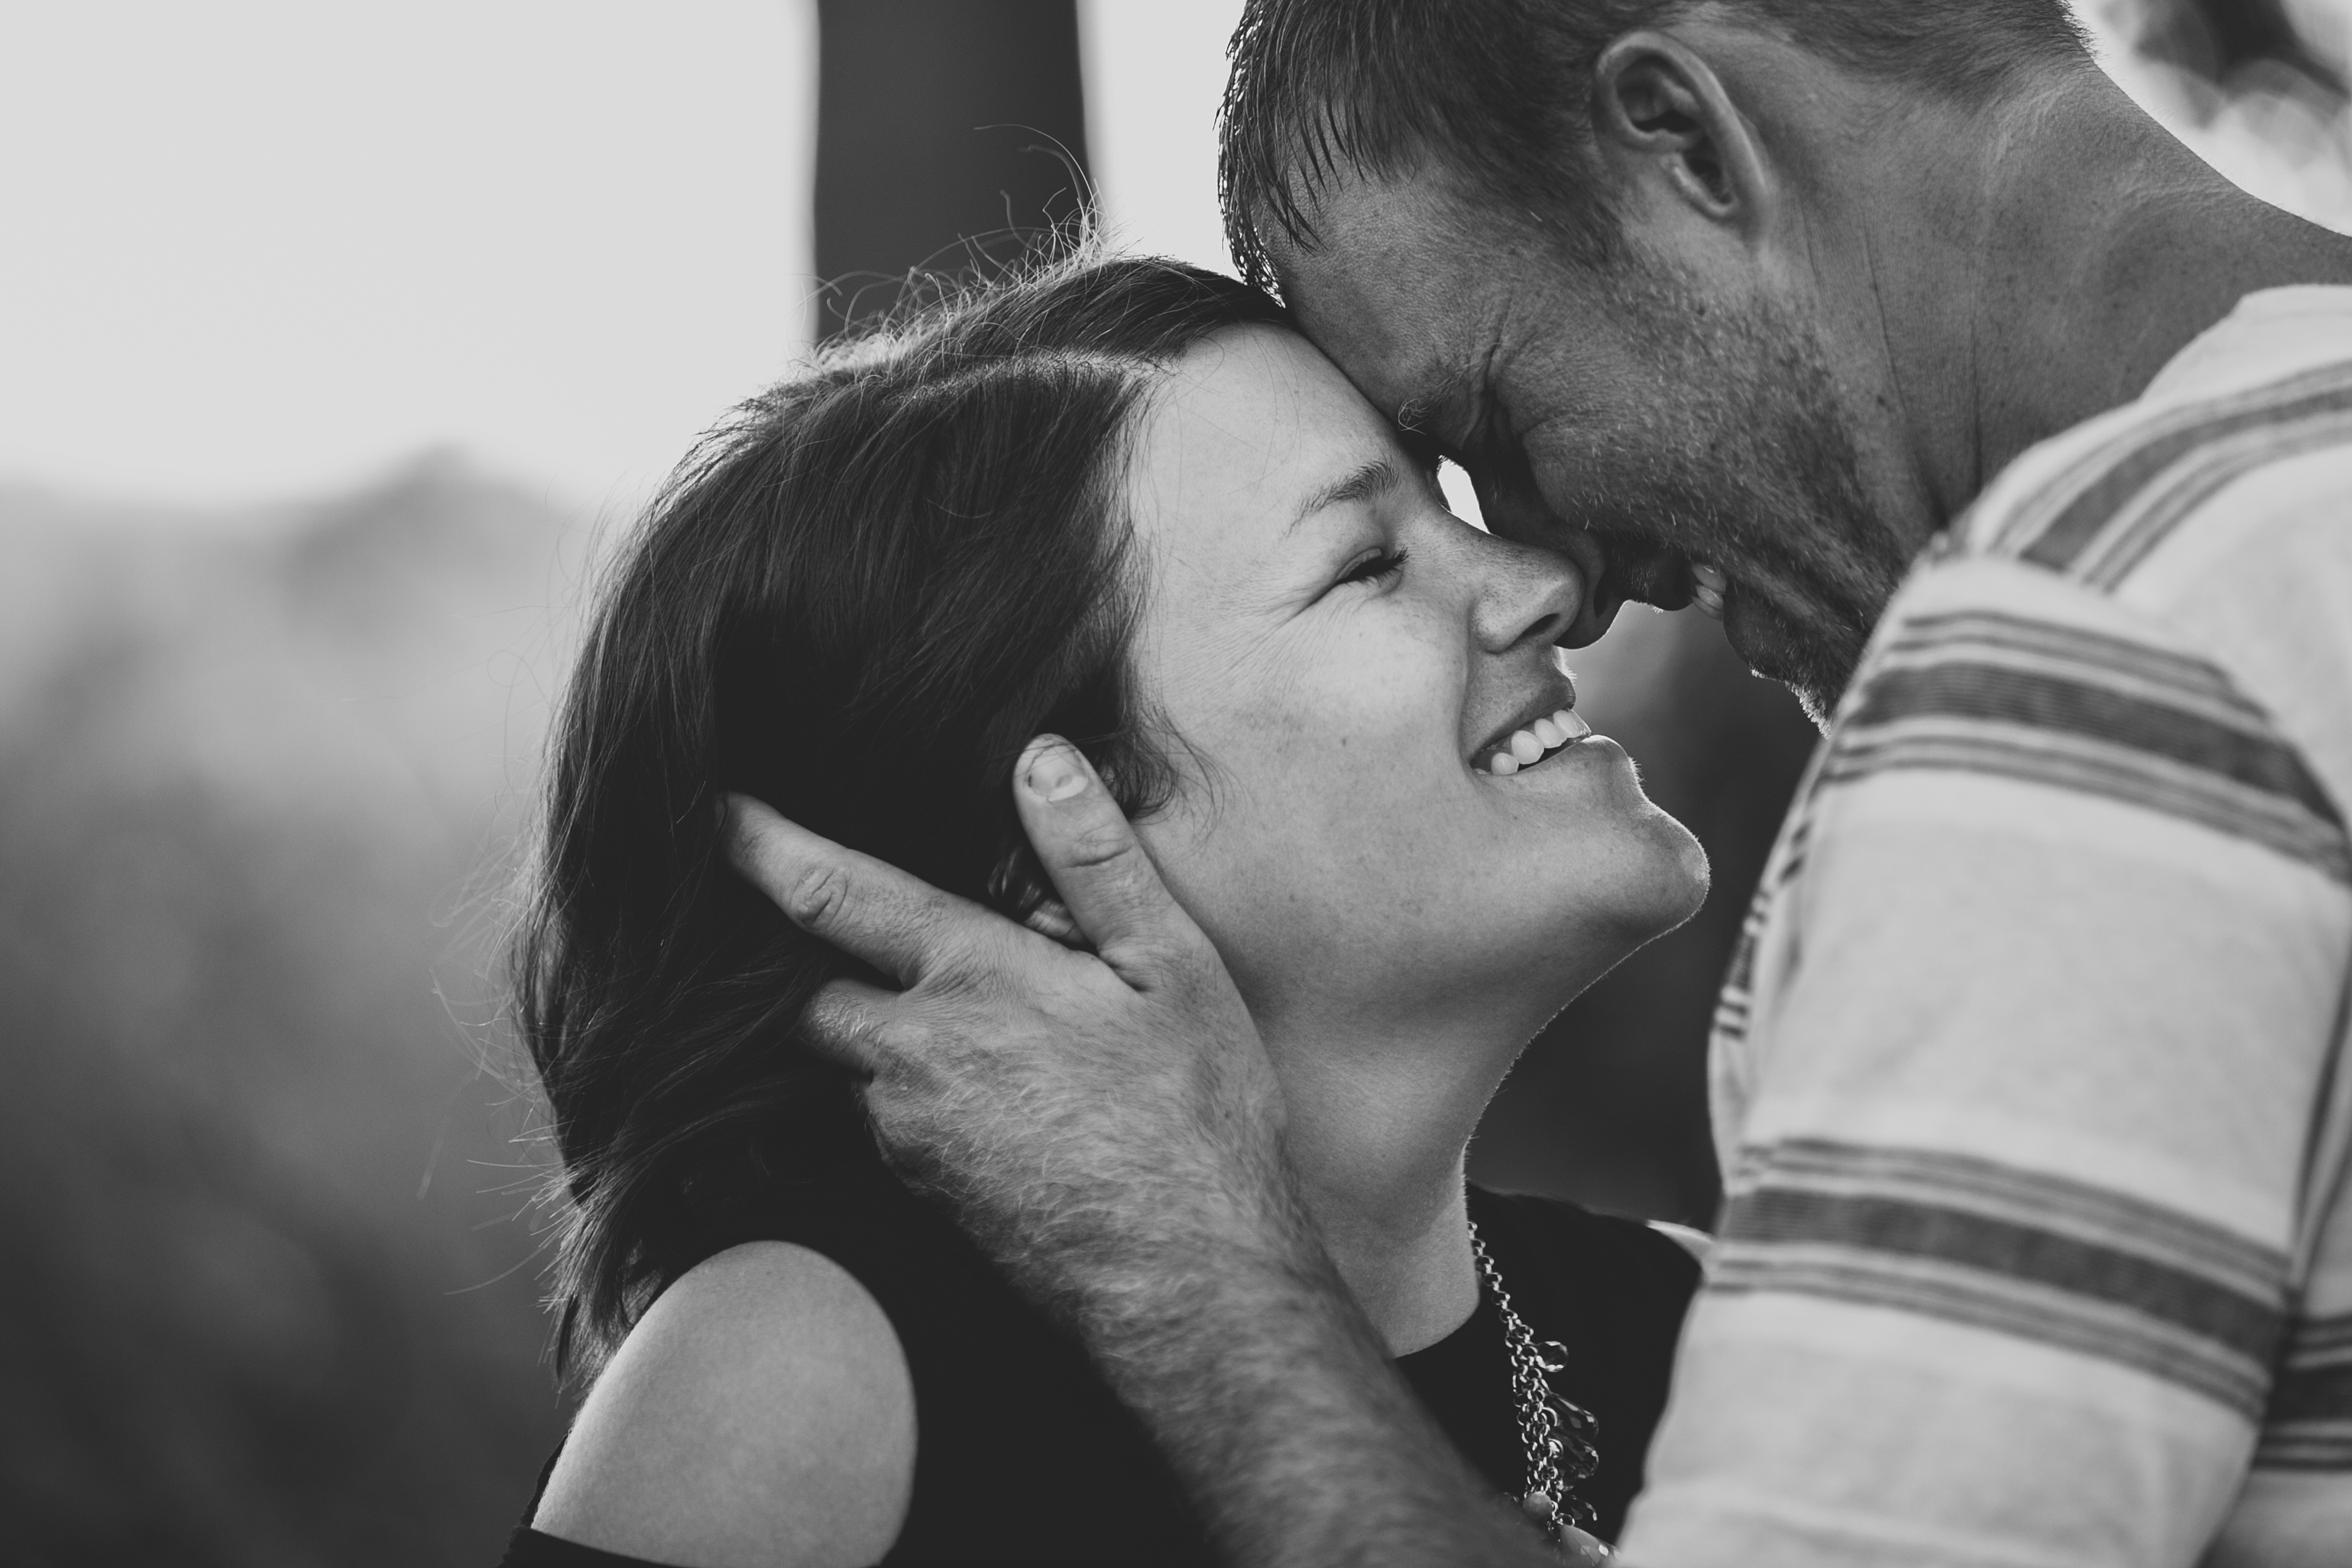 outdoor dubuque engagement session by catherine furlin photography, couple in black and white